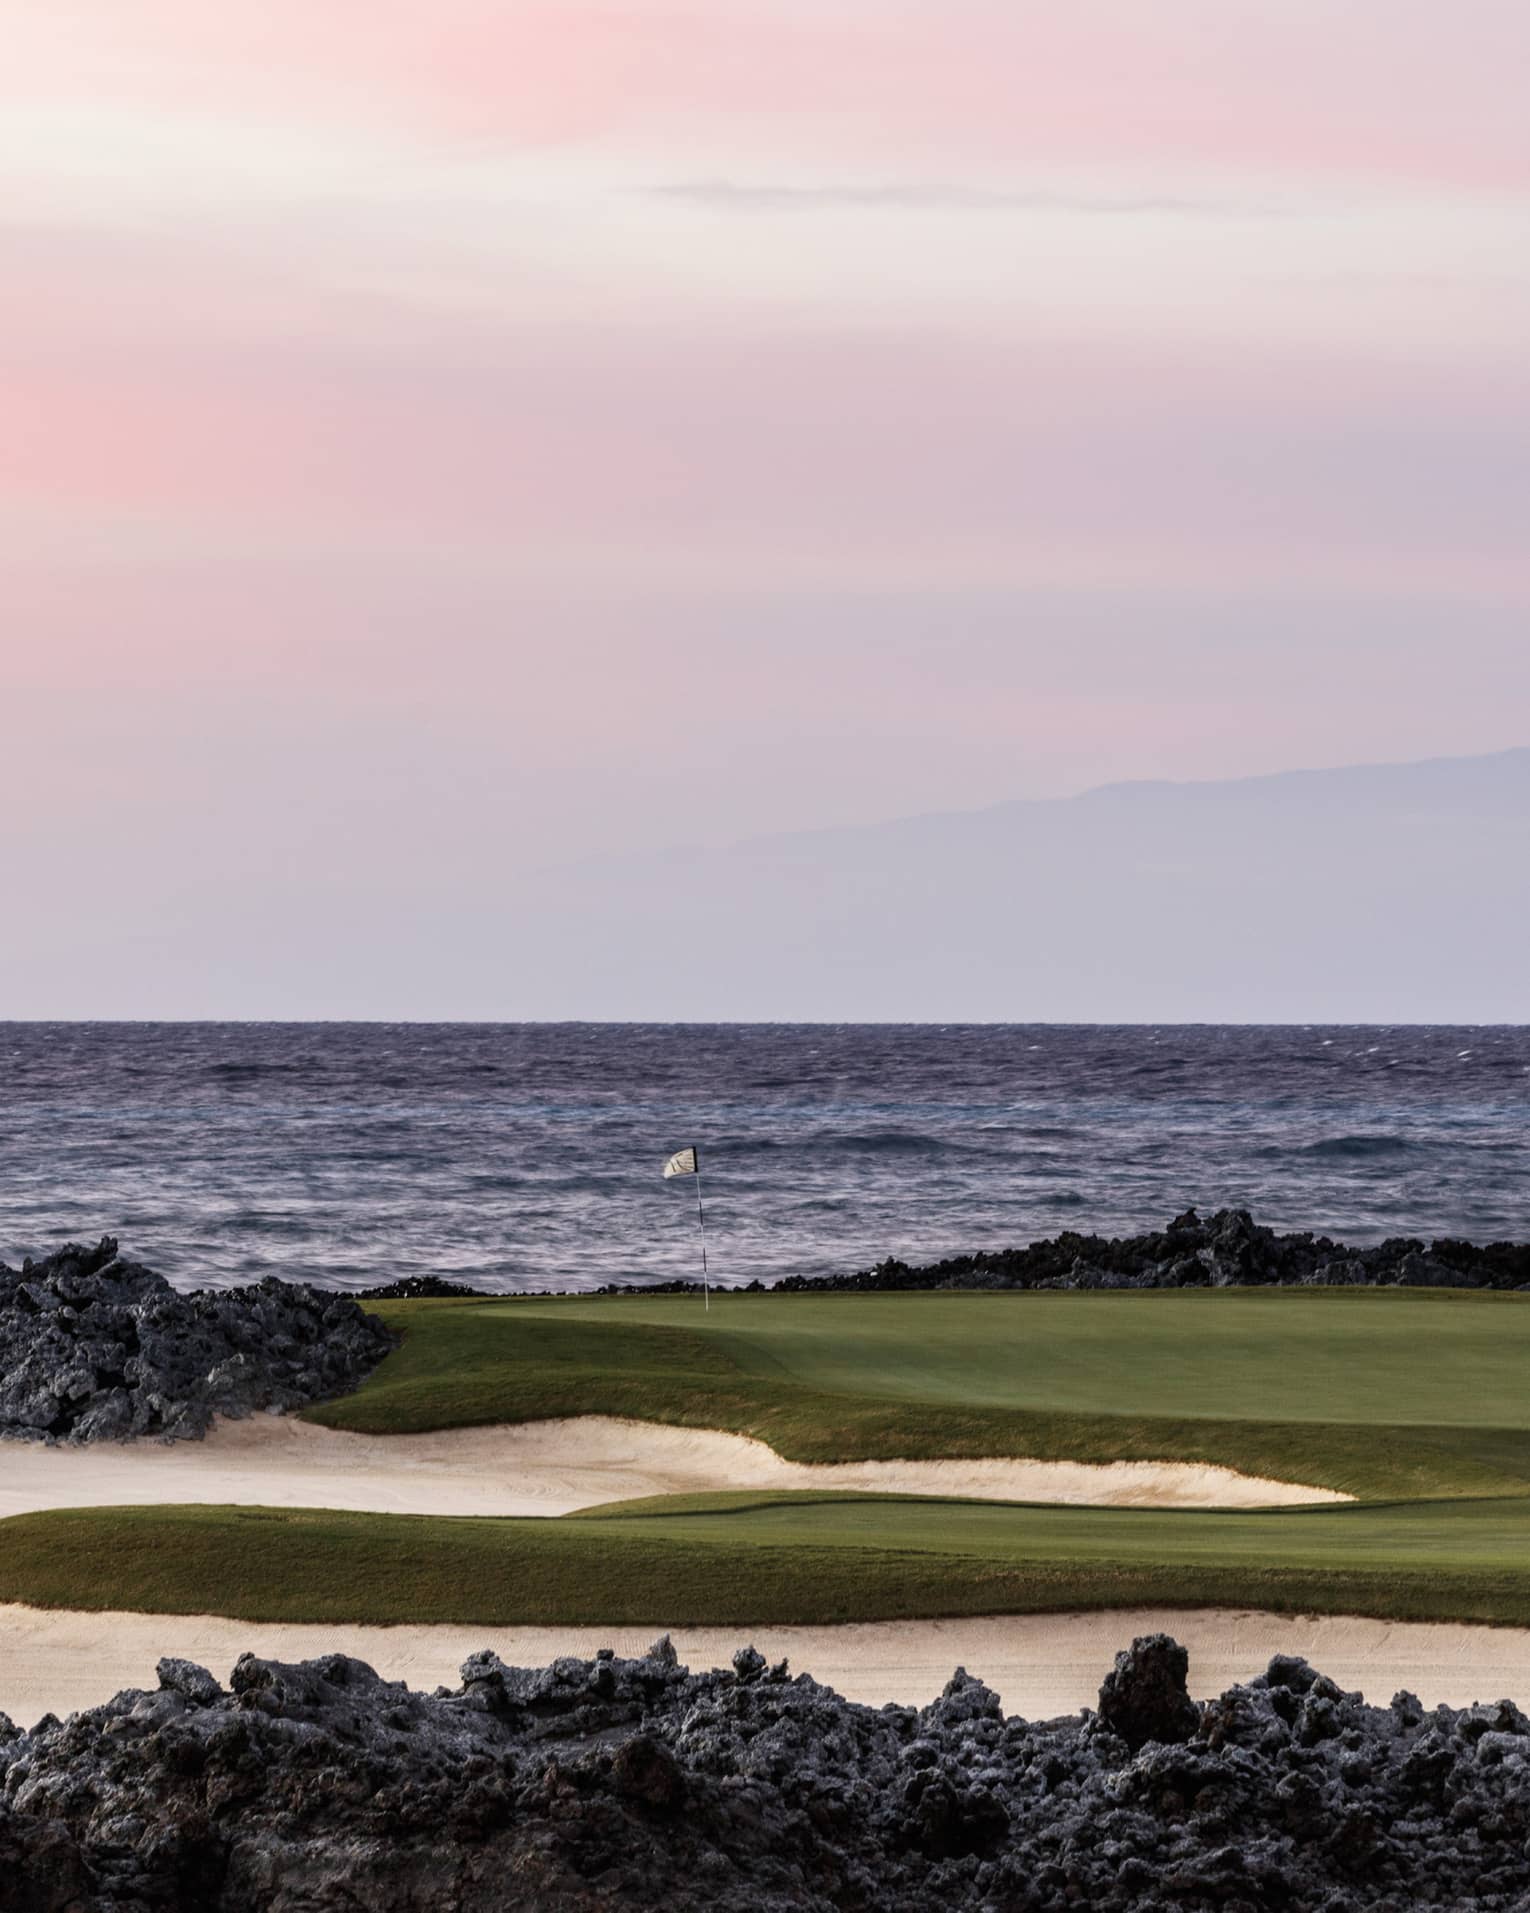 On an oceanside golf course beneath a rose-coloured sky, a single flagstick stands amid black lava rocks and white sand. 